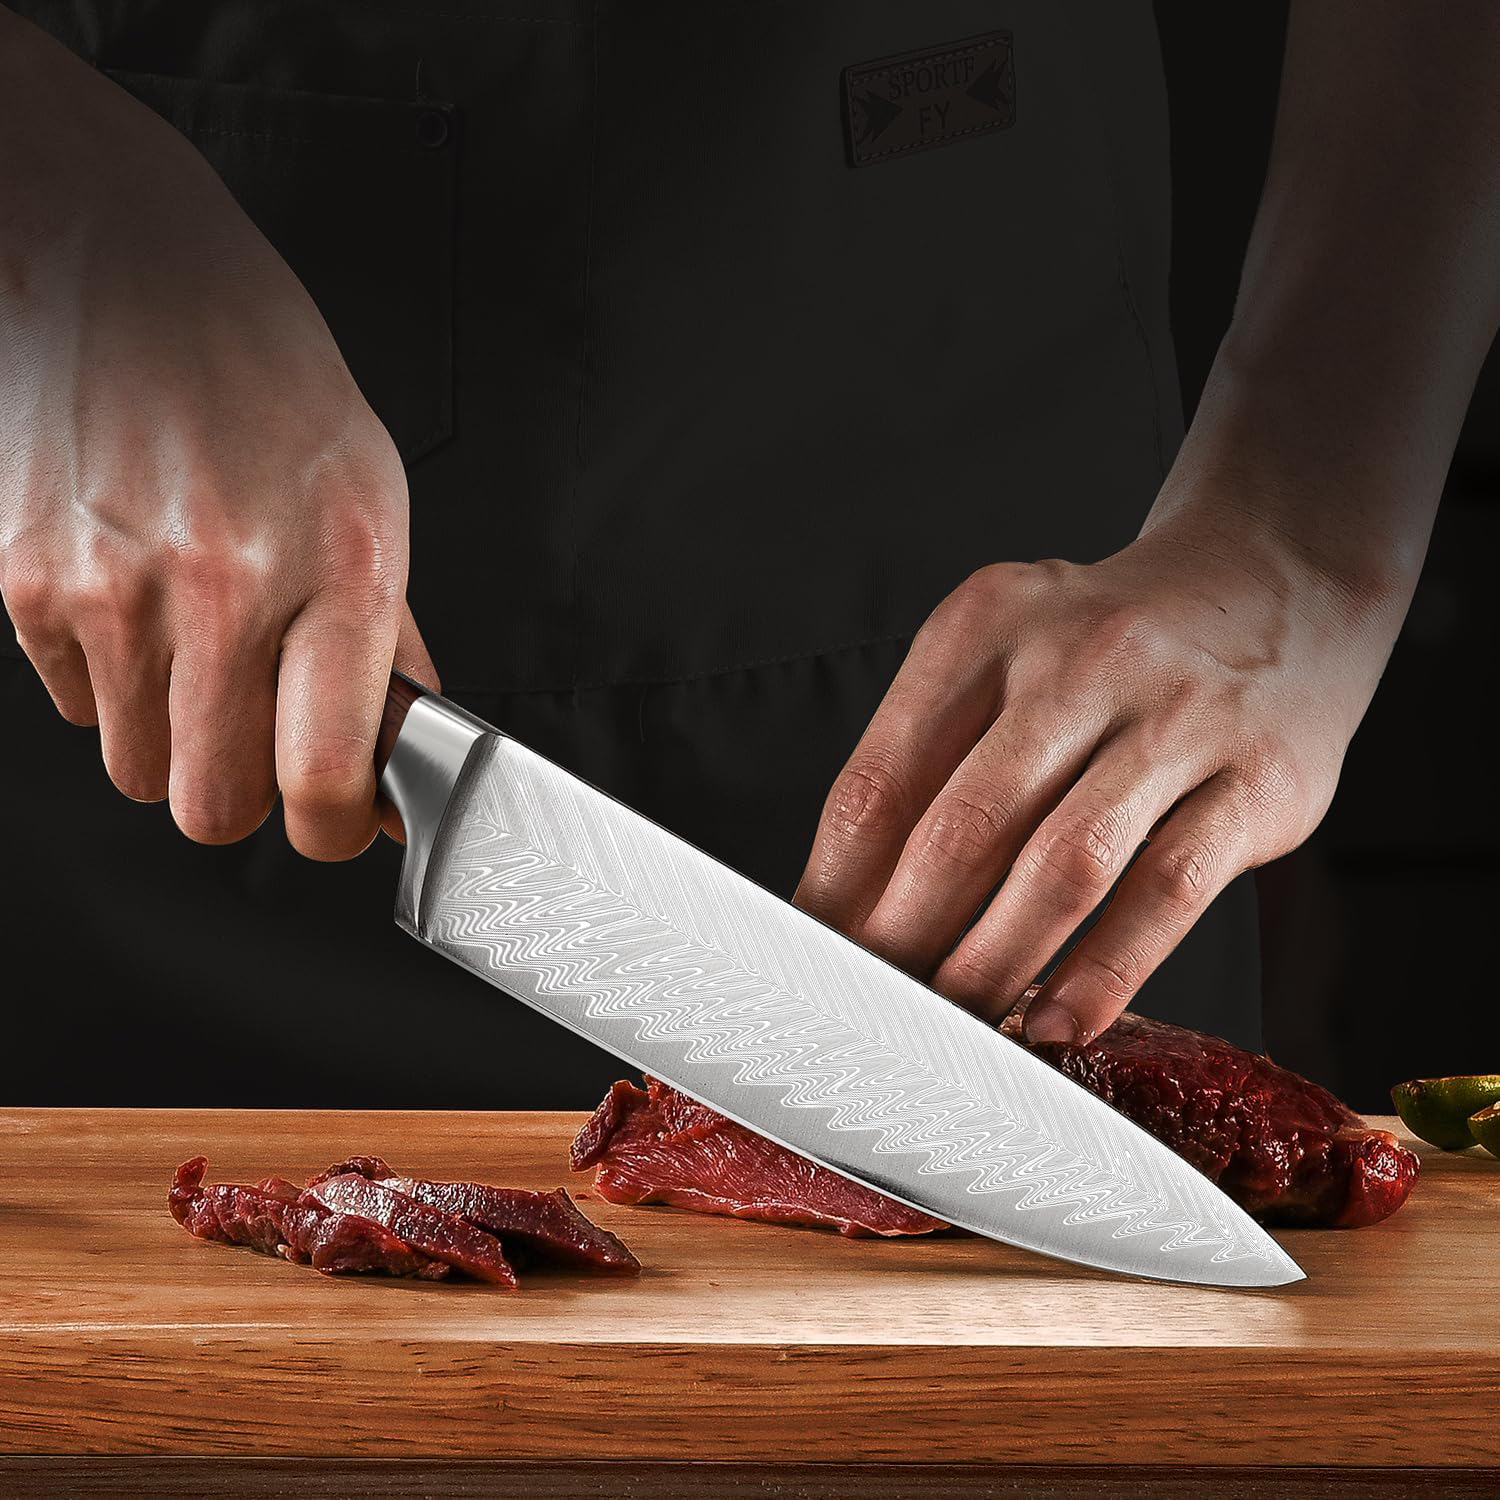 KD 8-Inch Chef's Knife: Precision Cutting with Black Pakkawood